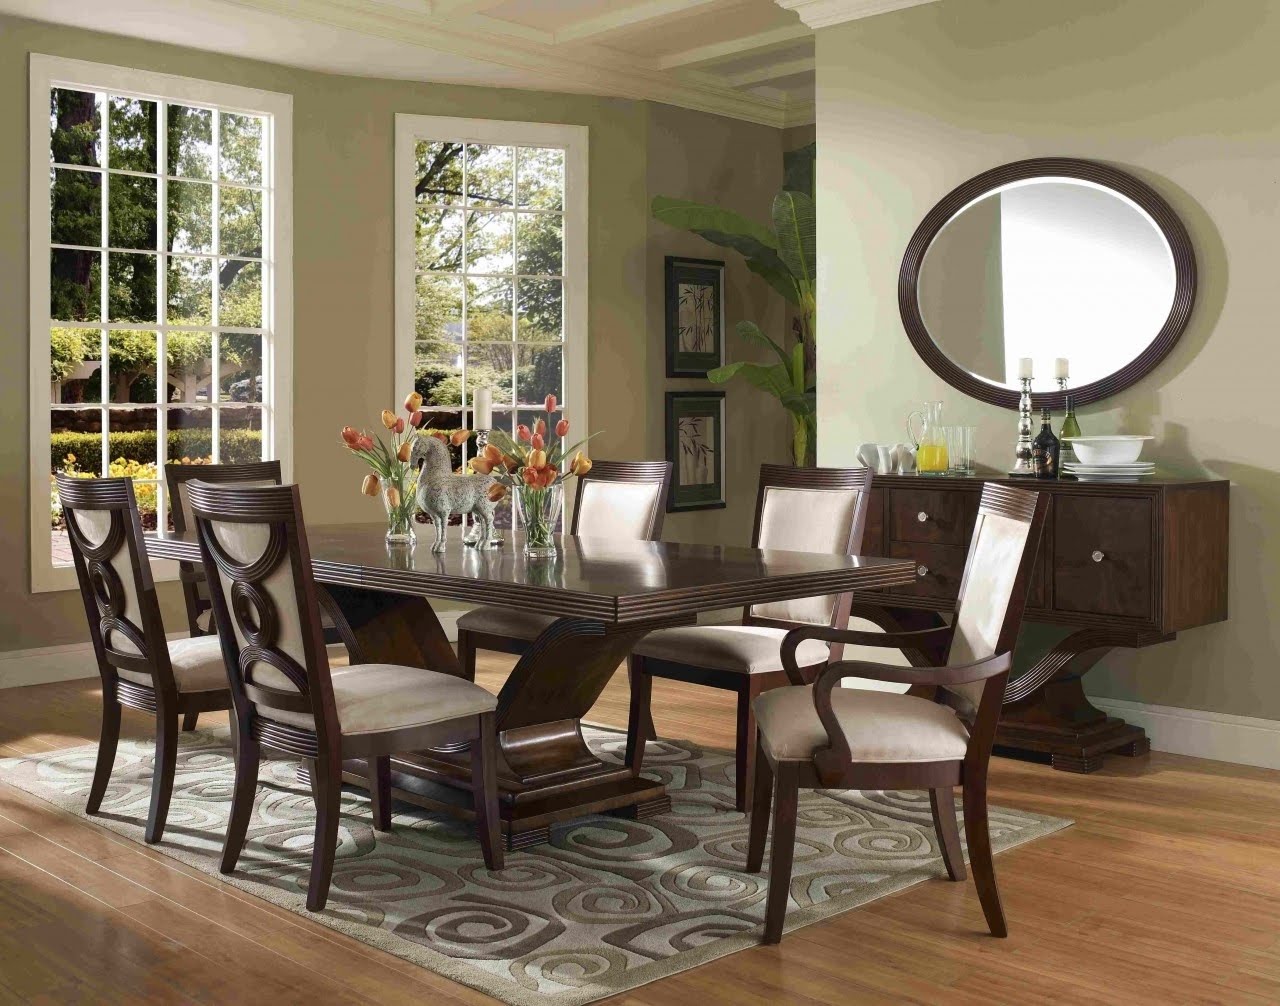 Formal Dining Room Sets Visualhunt, Formal Dining Room Sets For Small Spaces